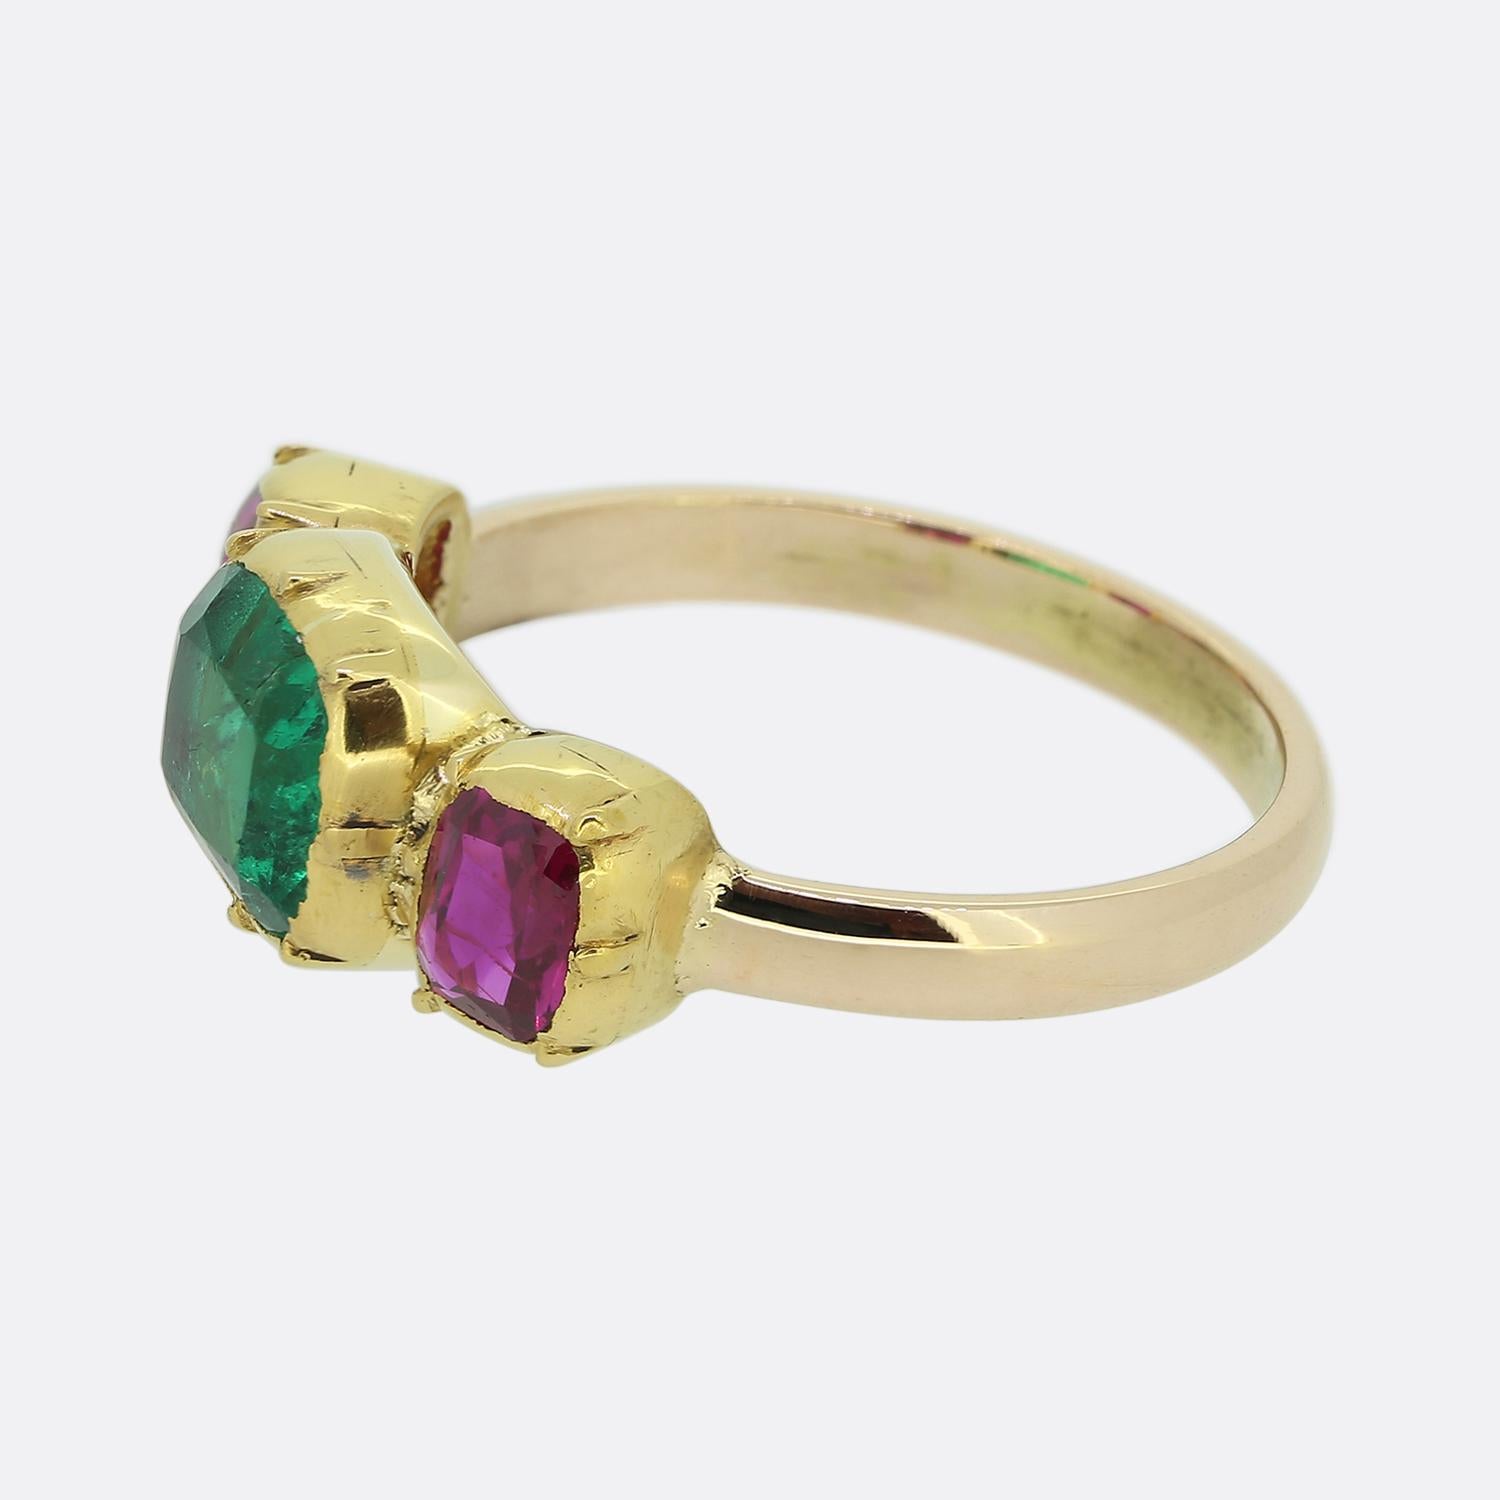 Here we have a remarkable emerald and ruby three-stone ring. The head of this vintage piece has been crafted from 22ct yellow gold and features a trio of precious gemstones. An oval shaped Colombian emerald possessing an astoundingly vivid electric